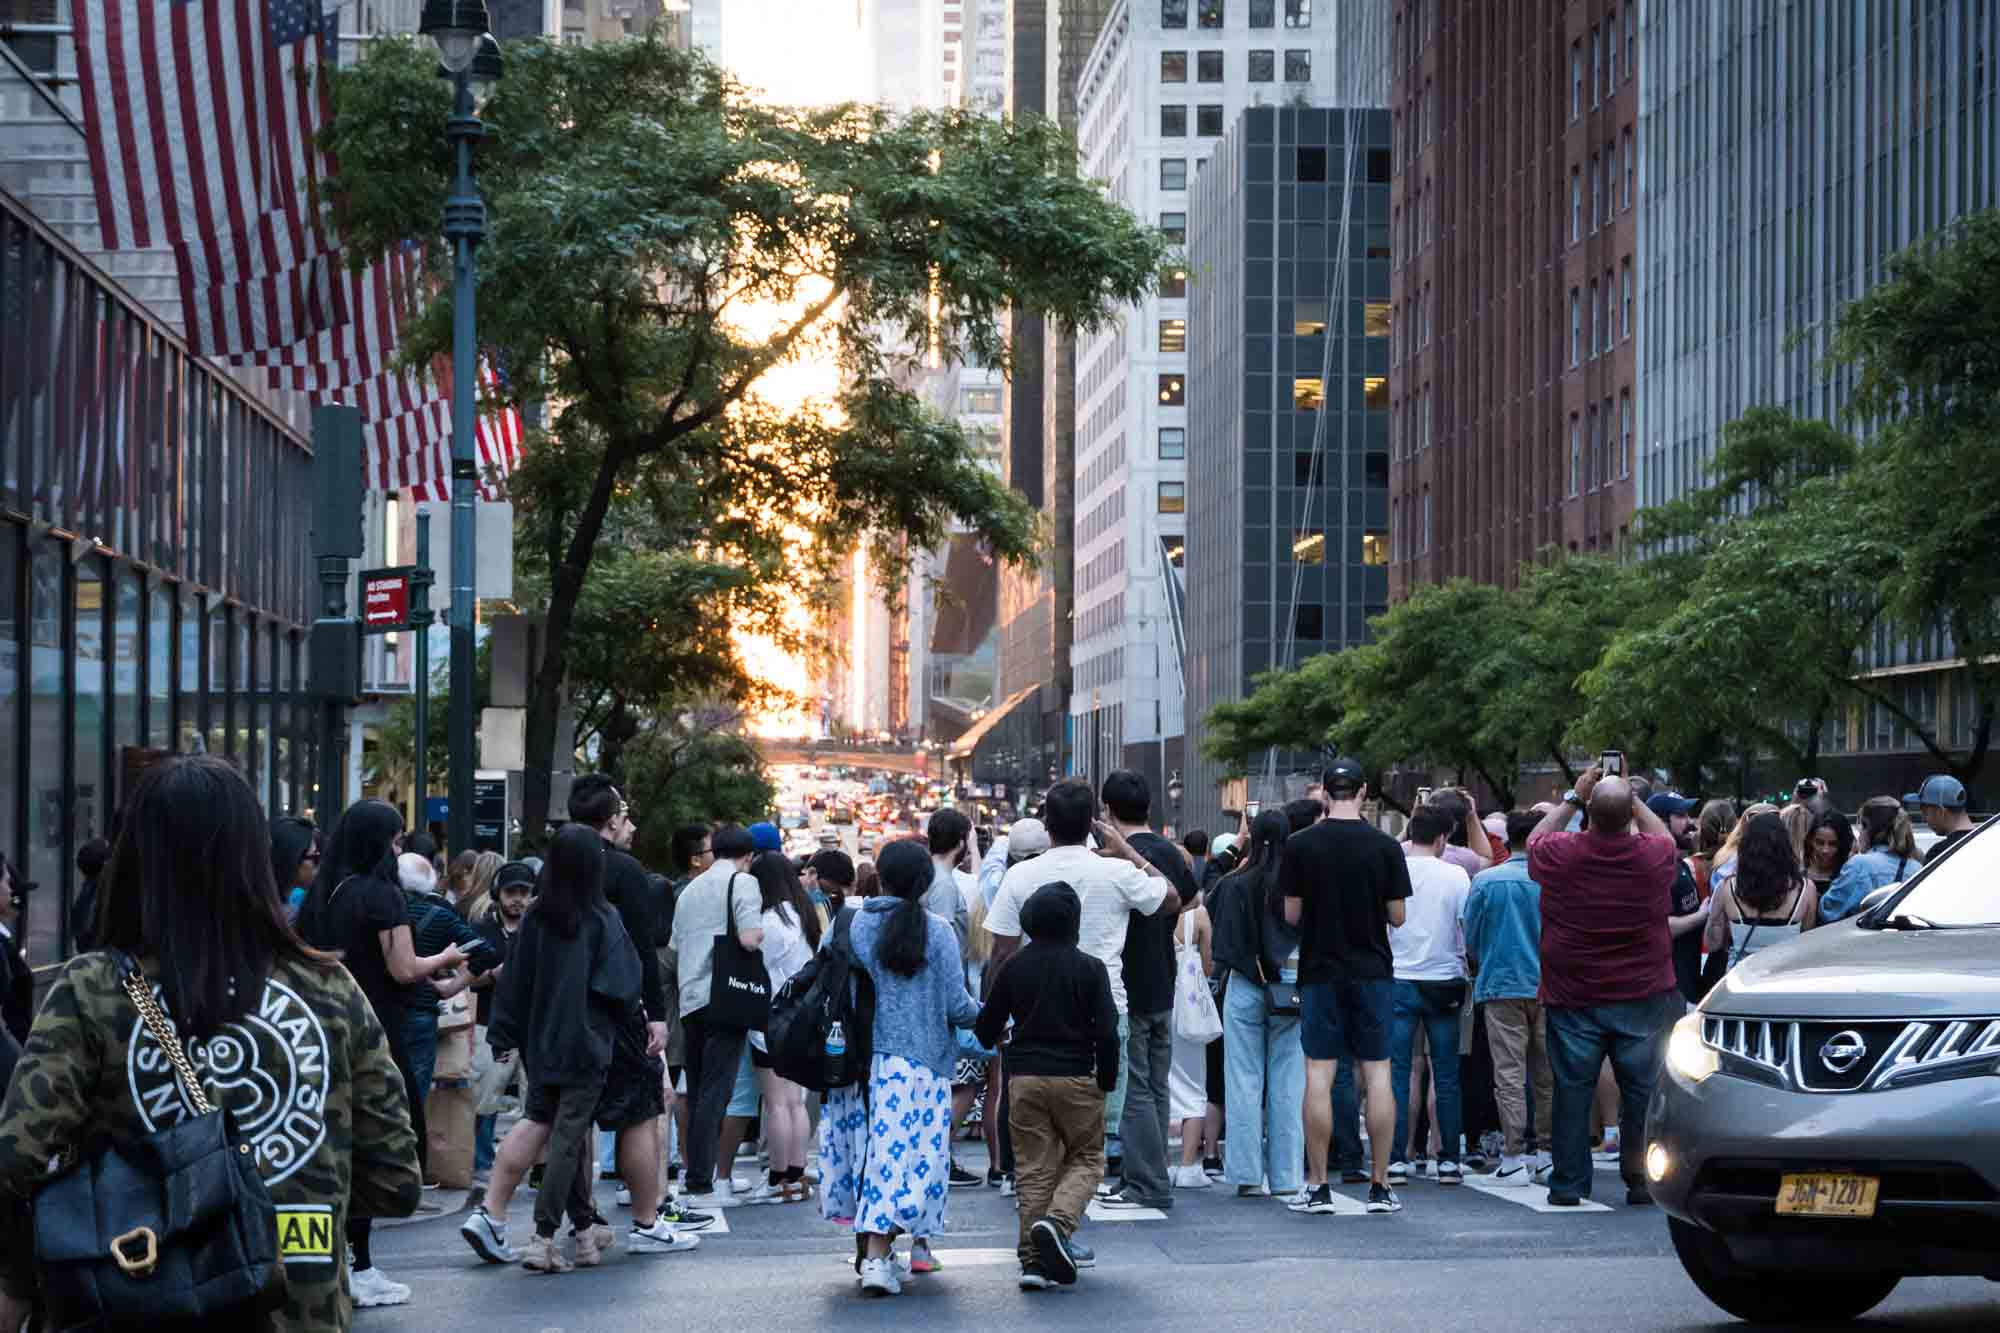 Tourists in a NYC street with cellphones in hand during Manhattanhenge